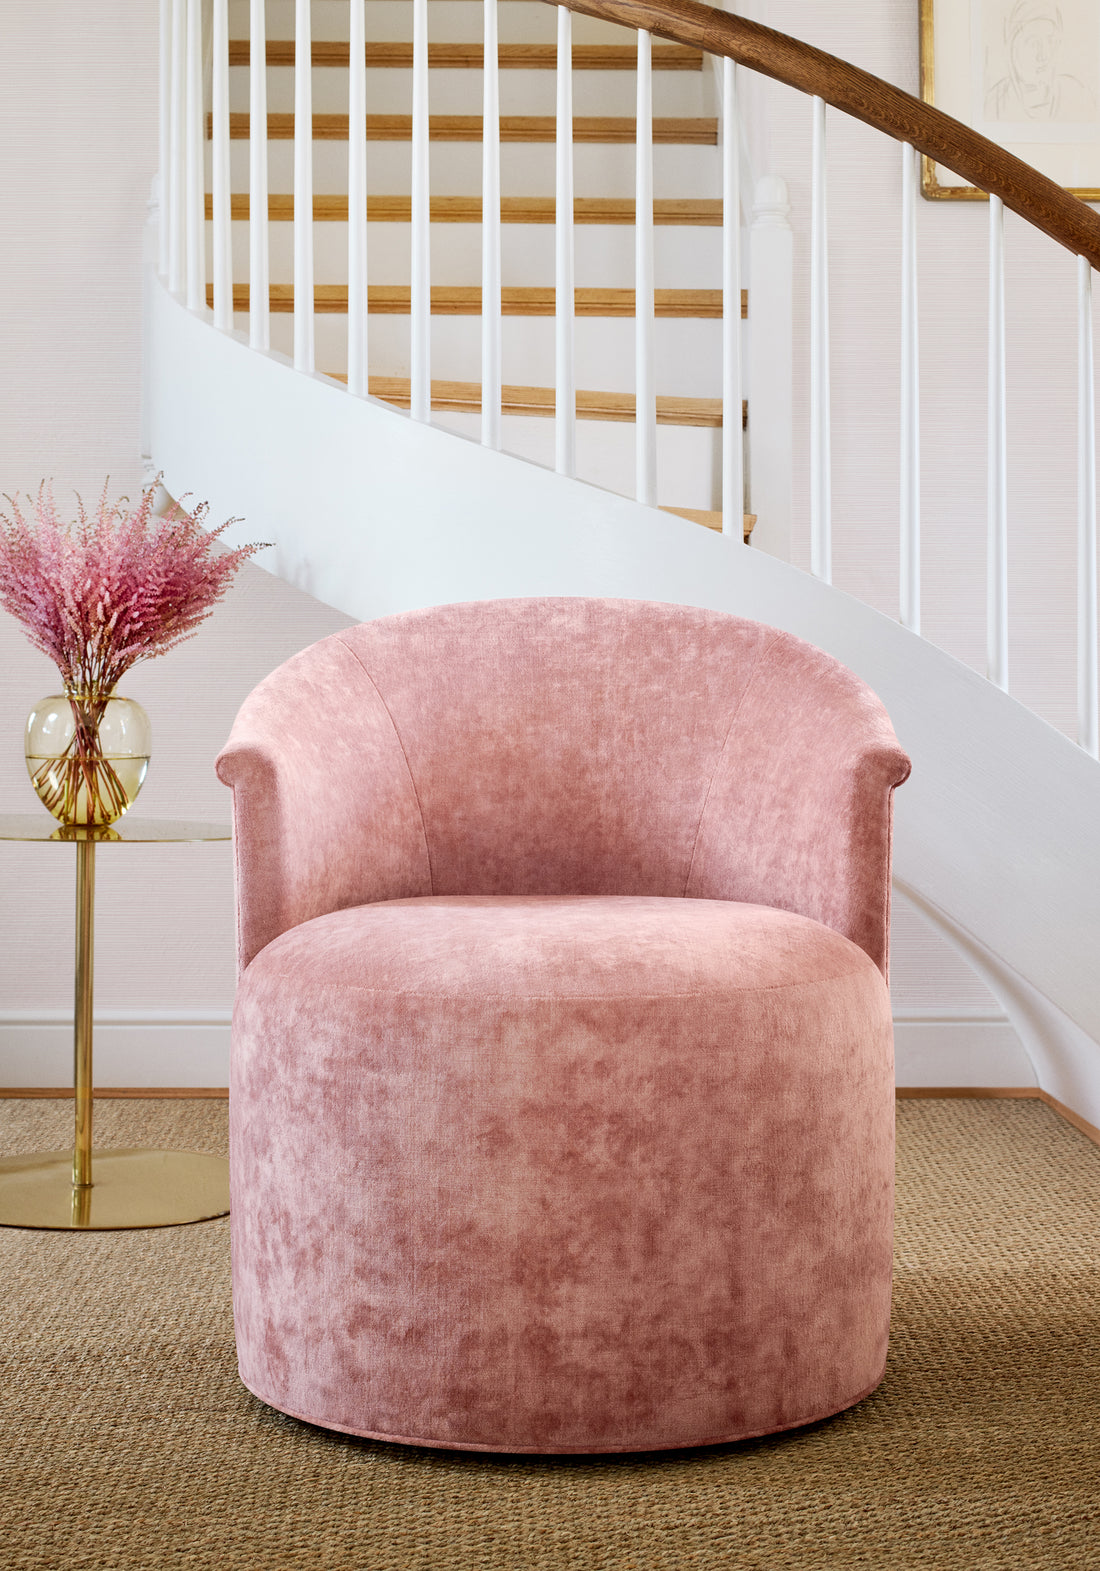 Chair upholstered Celeste Velvet fabric in blush color - pattern number W8969 - by Thibaut in the Lyra Velvets collection